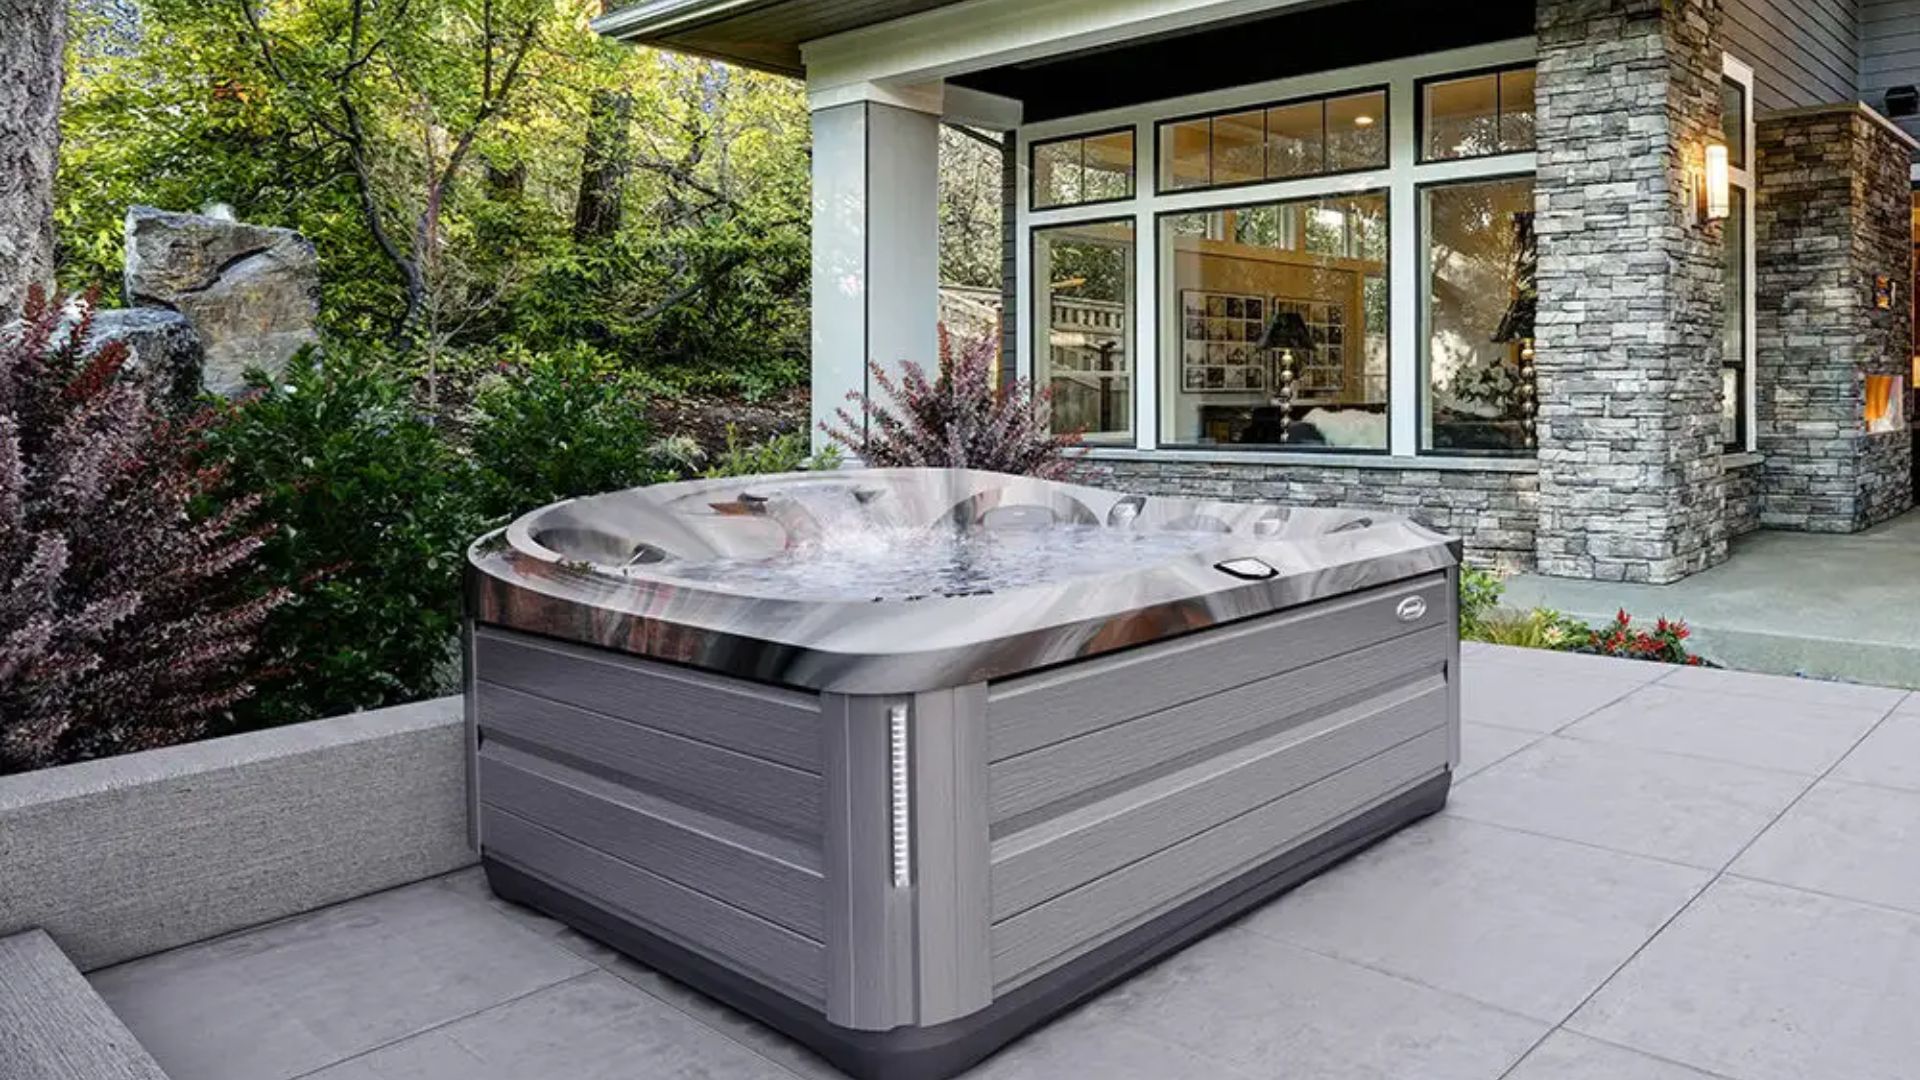 How a Jacuzzi Improves Your Health